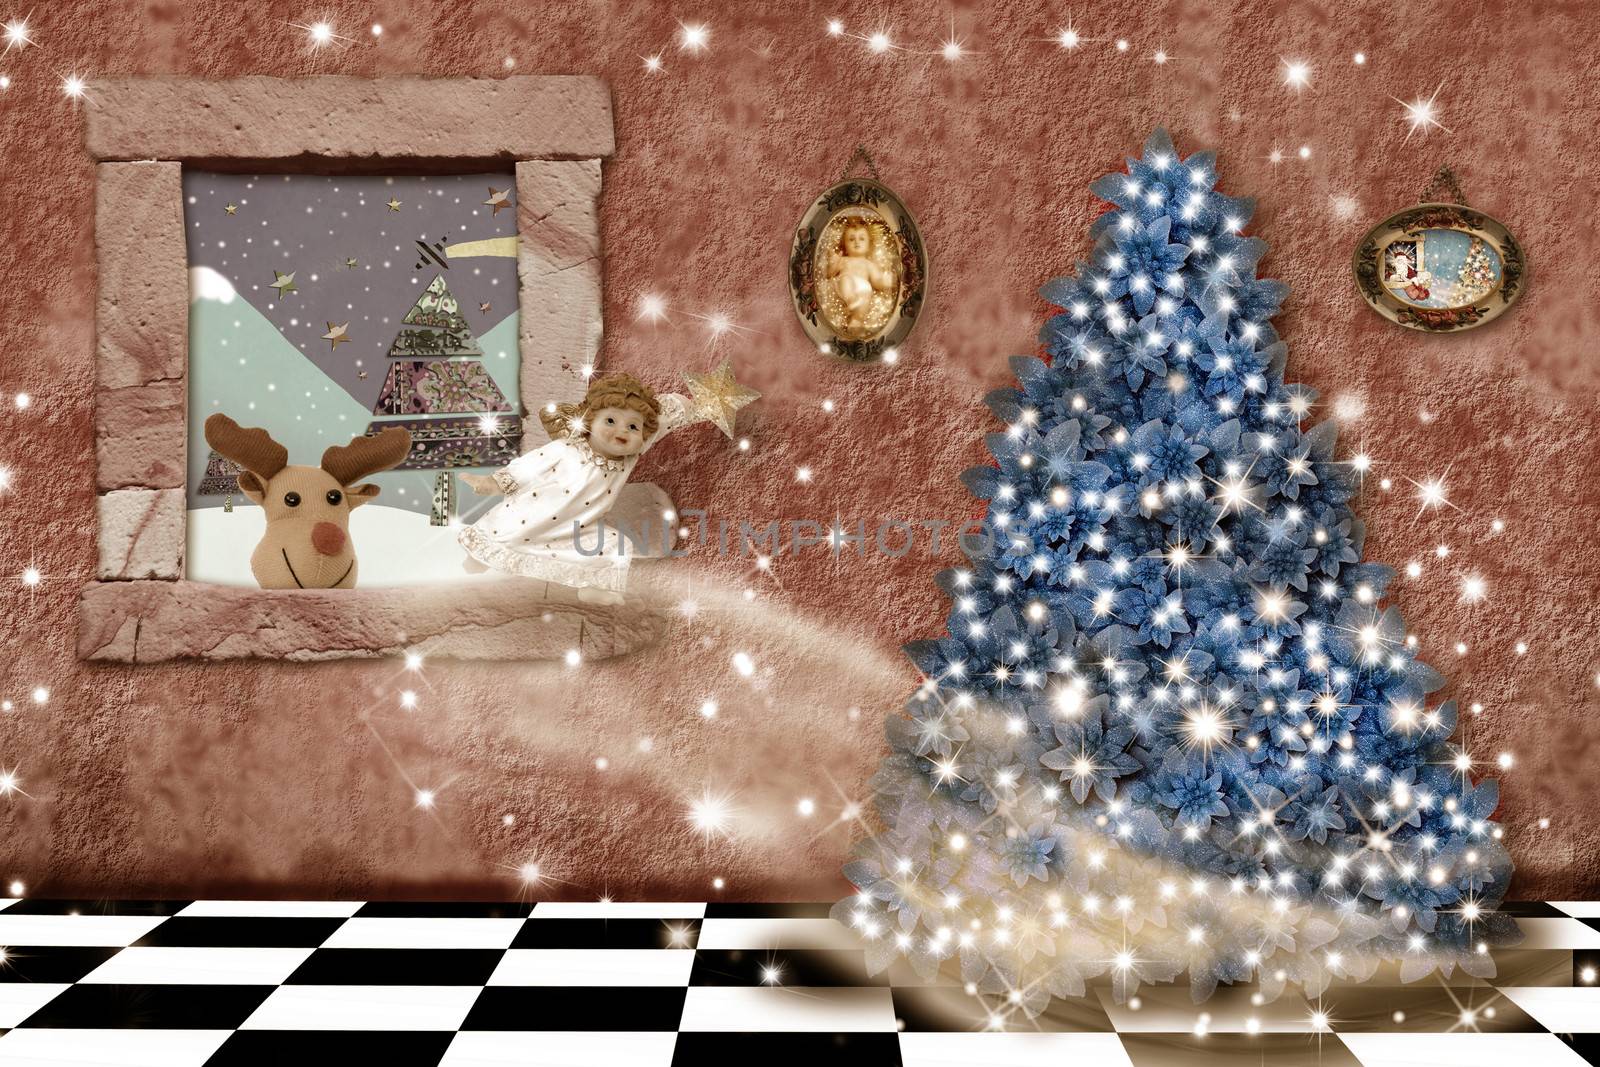 happy and magical scene eve, angel, reindeer and Christmas tree inside the home